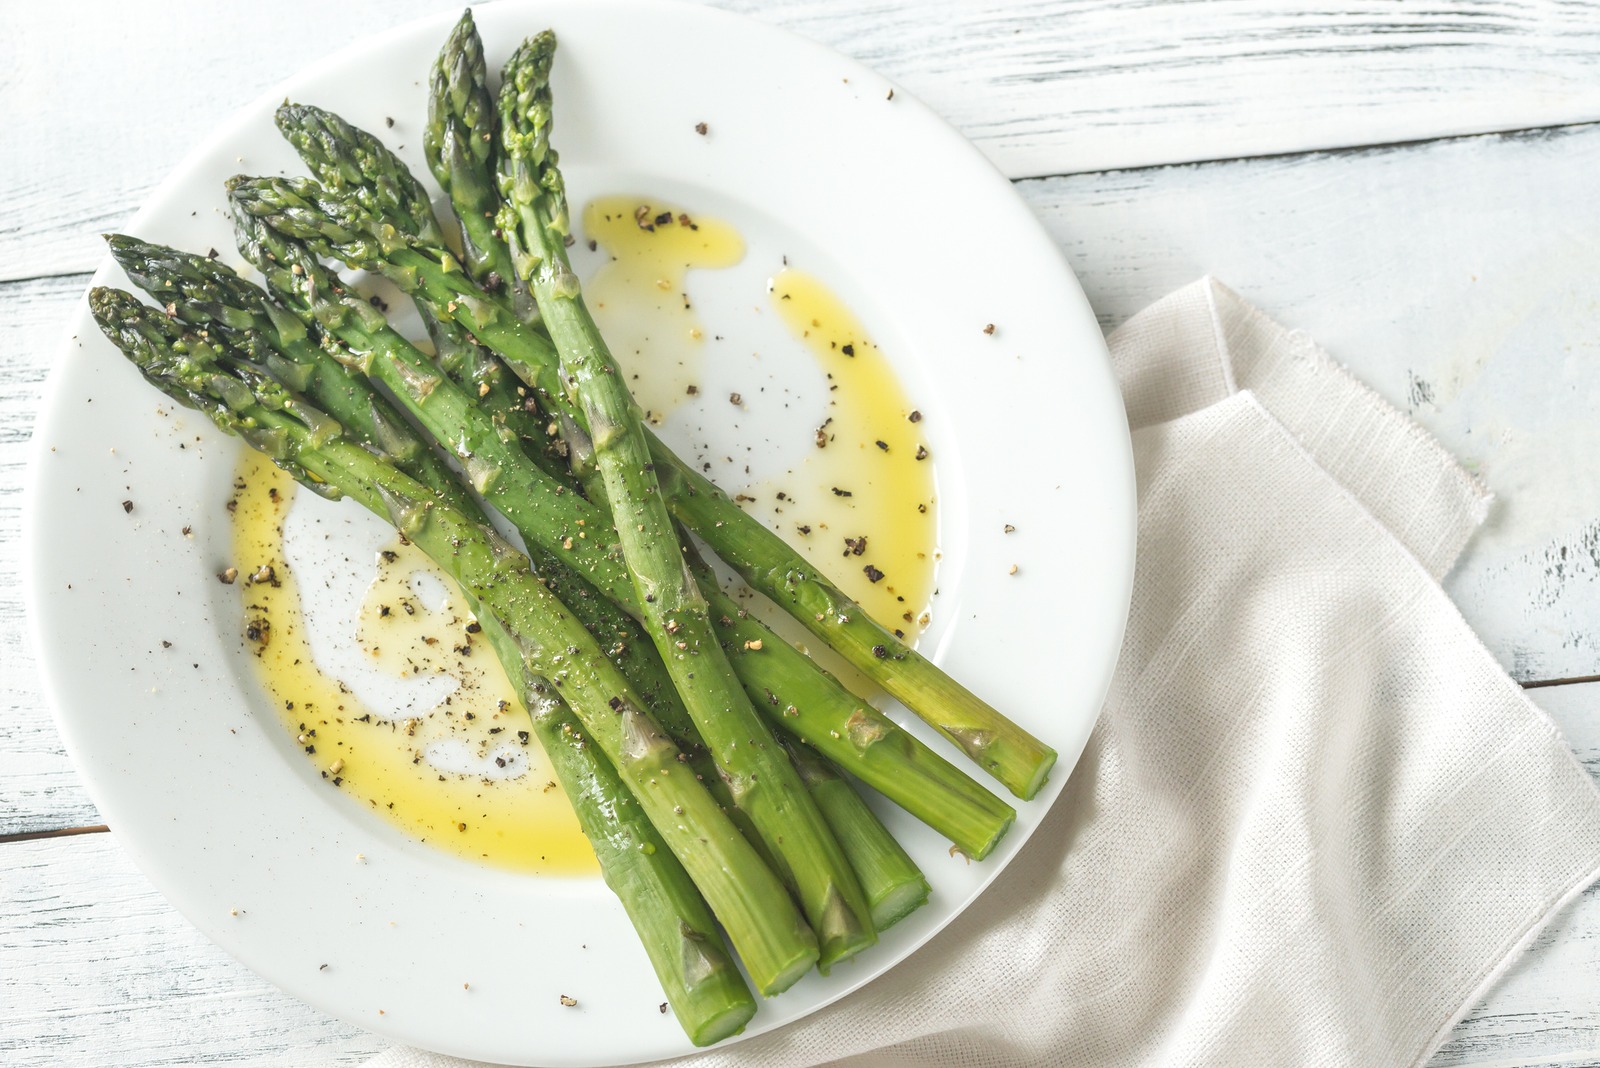 We Know Which Decade of Life You’re in Based on This Food Test Asparagus